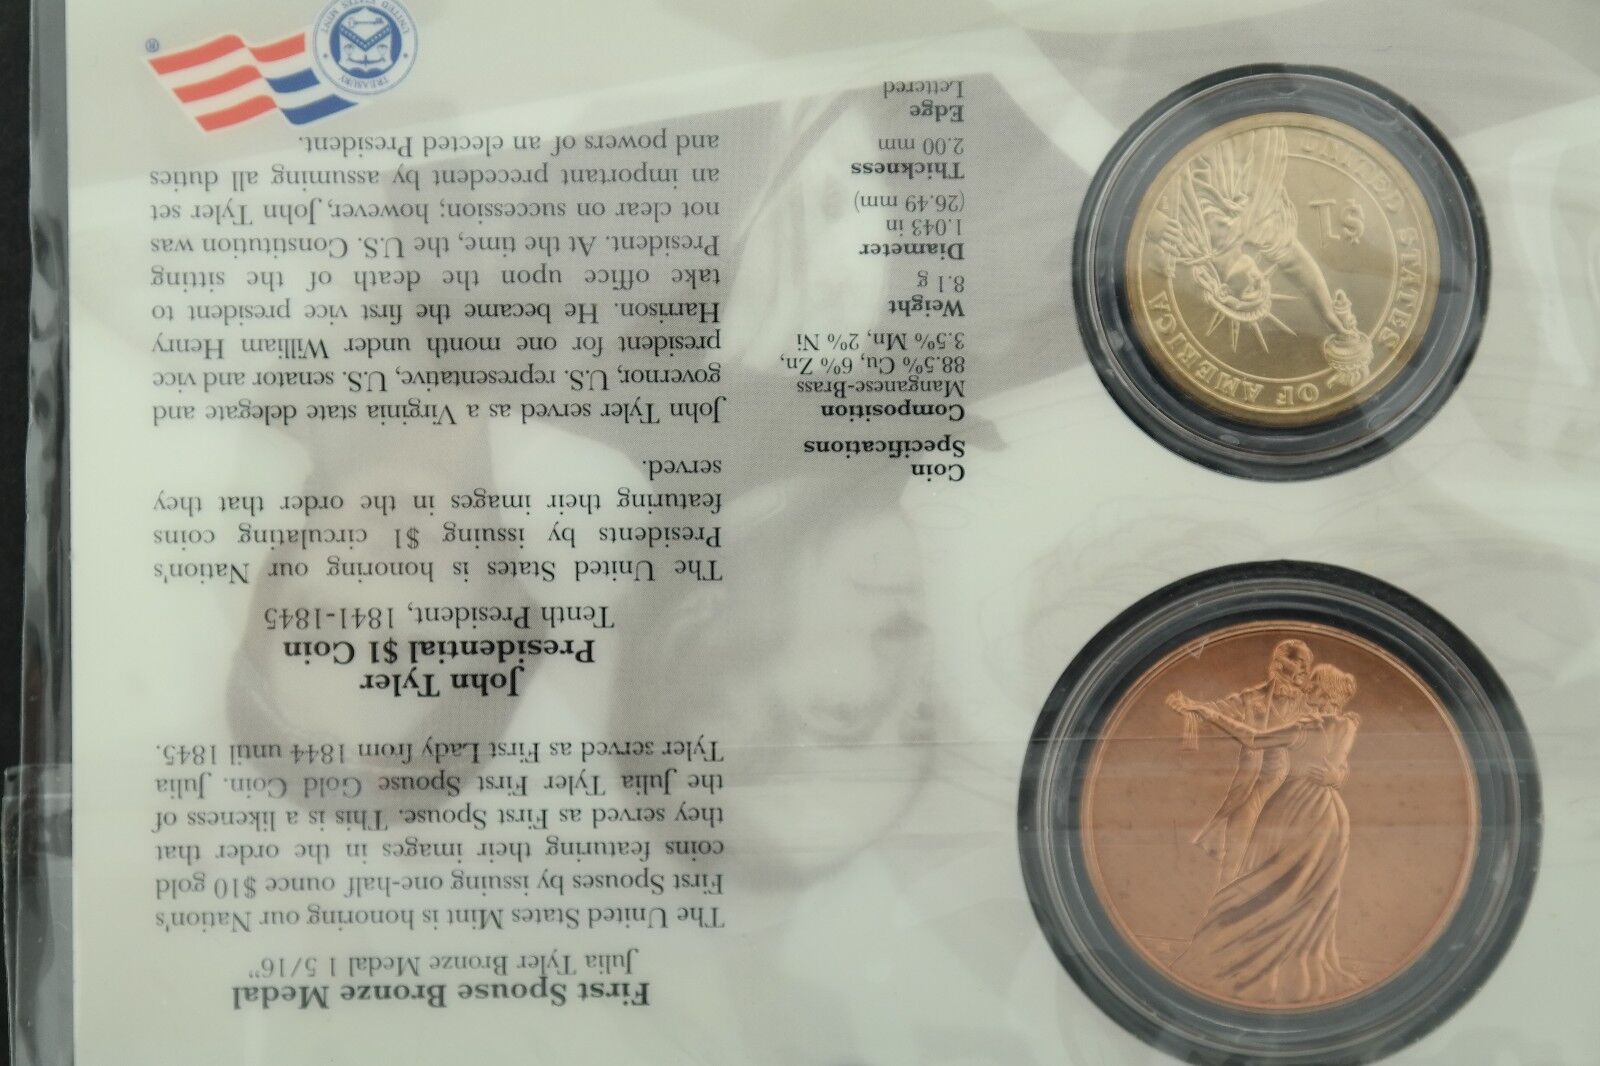 United States Mint Presidential $1 Coin & First Spouse Medal Set - Tyler Без бренда - фотография #6